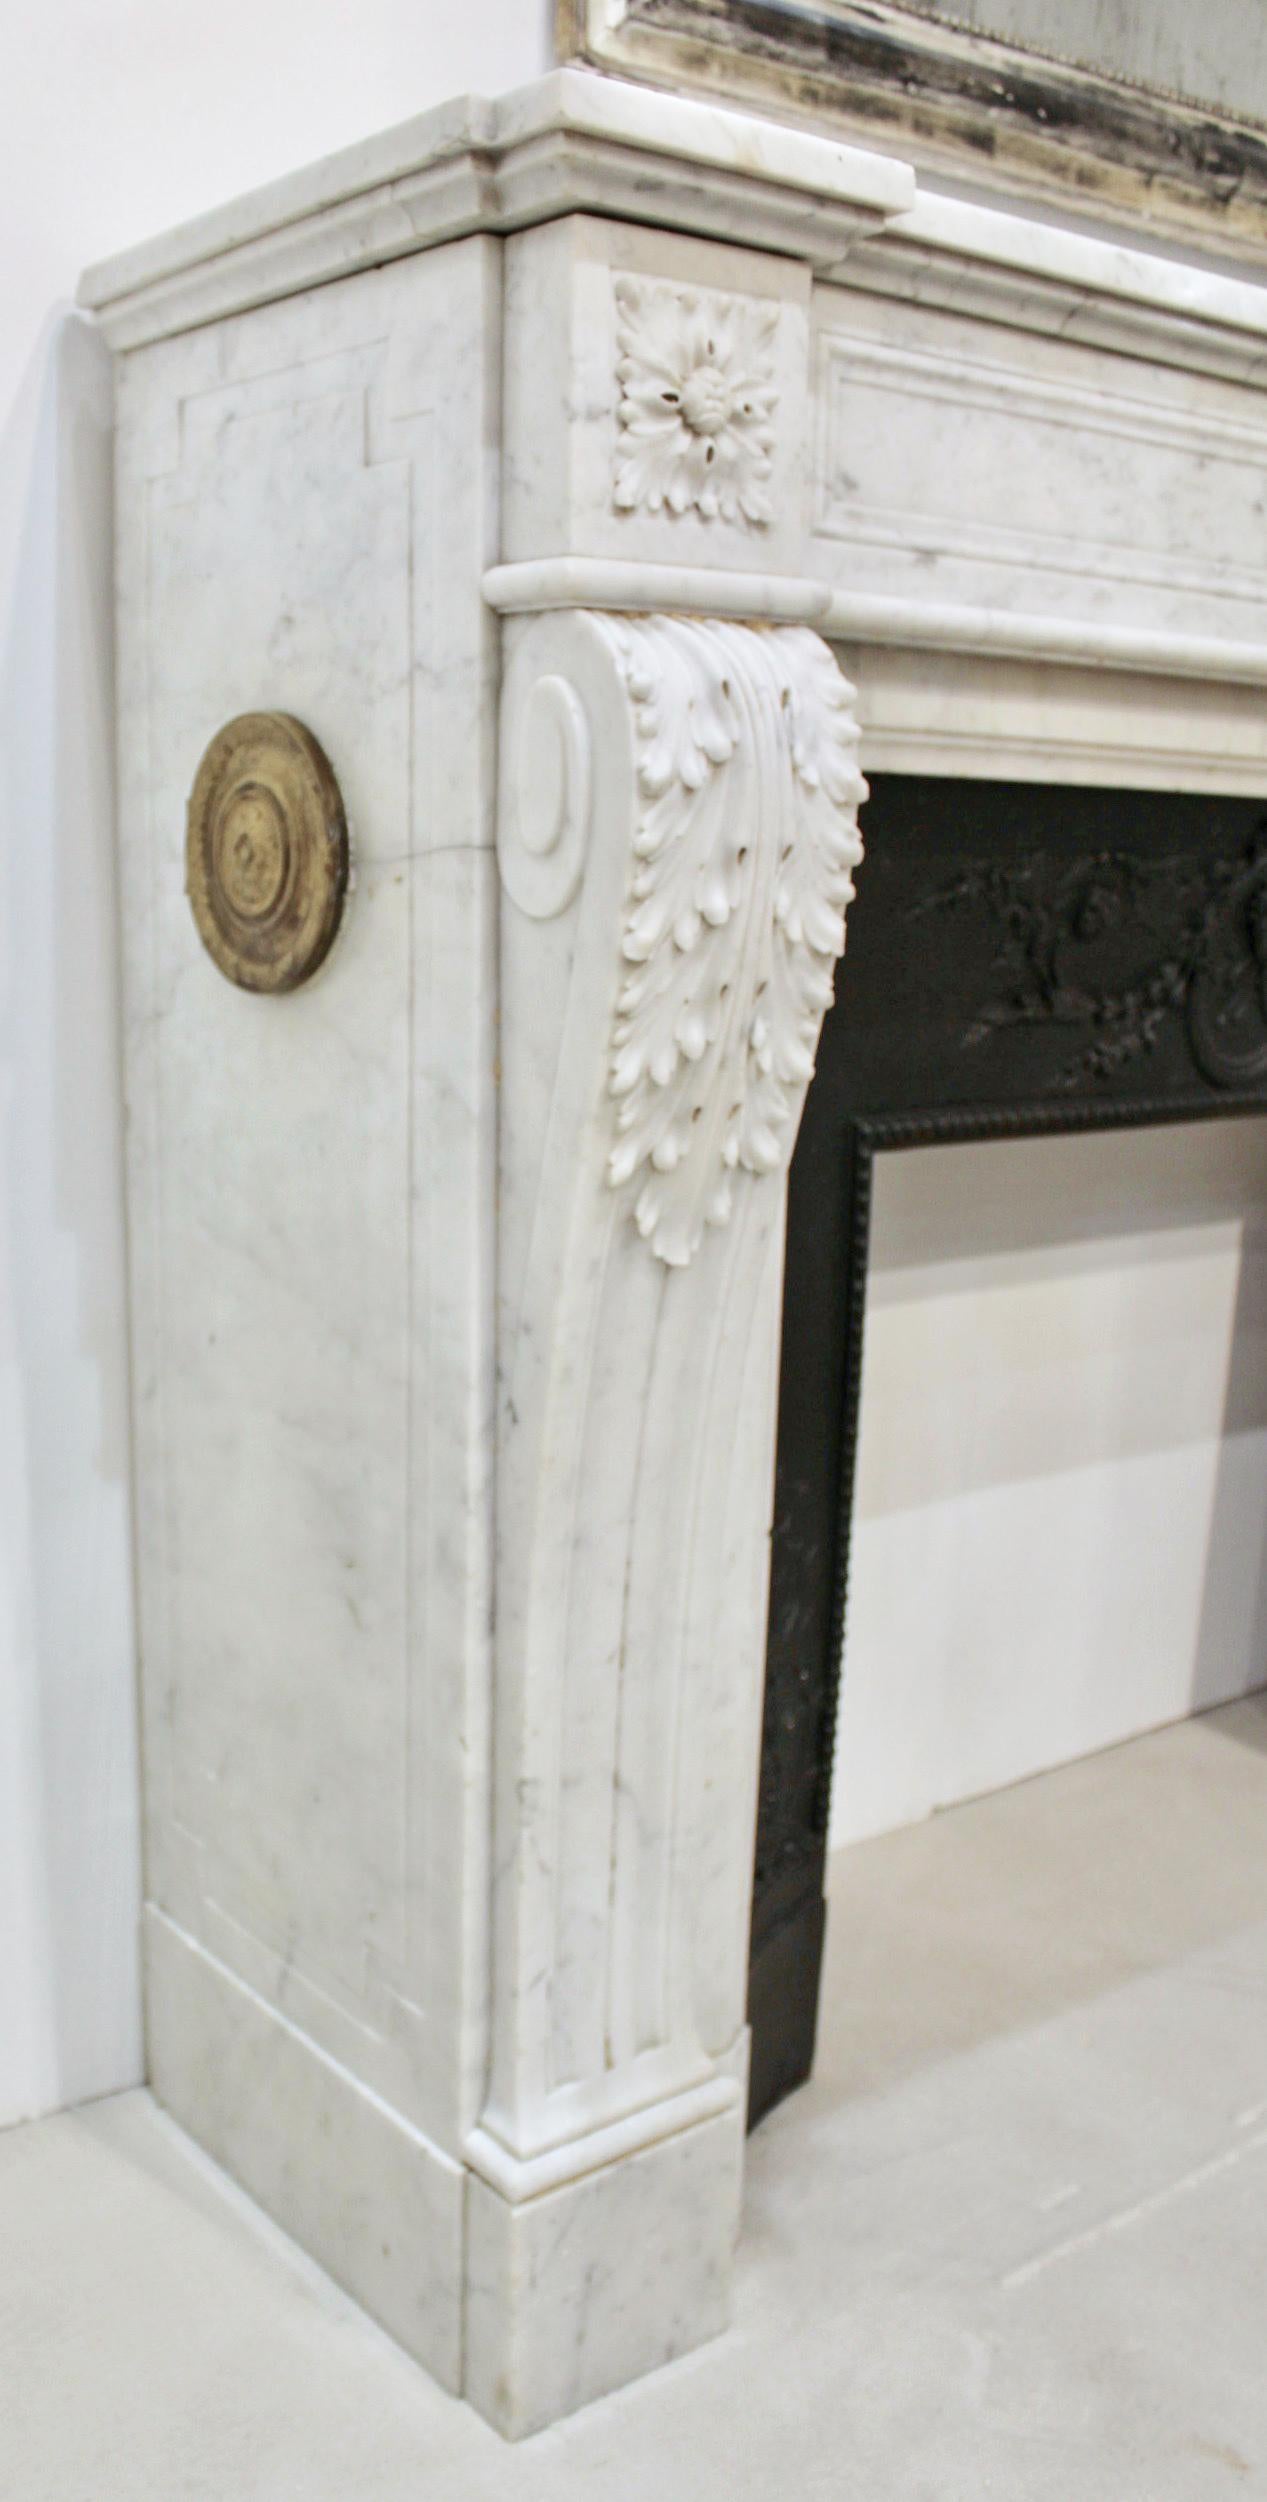 Louis XVI fireplace mantel in white hand carved Carrara marble, with decorative Bronze doré vents. Large carved Acanthus leaves are covering the top of the arched jambs resting on fluted console feet that sustain a bandeau ornated by sculpted square